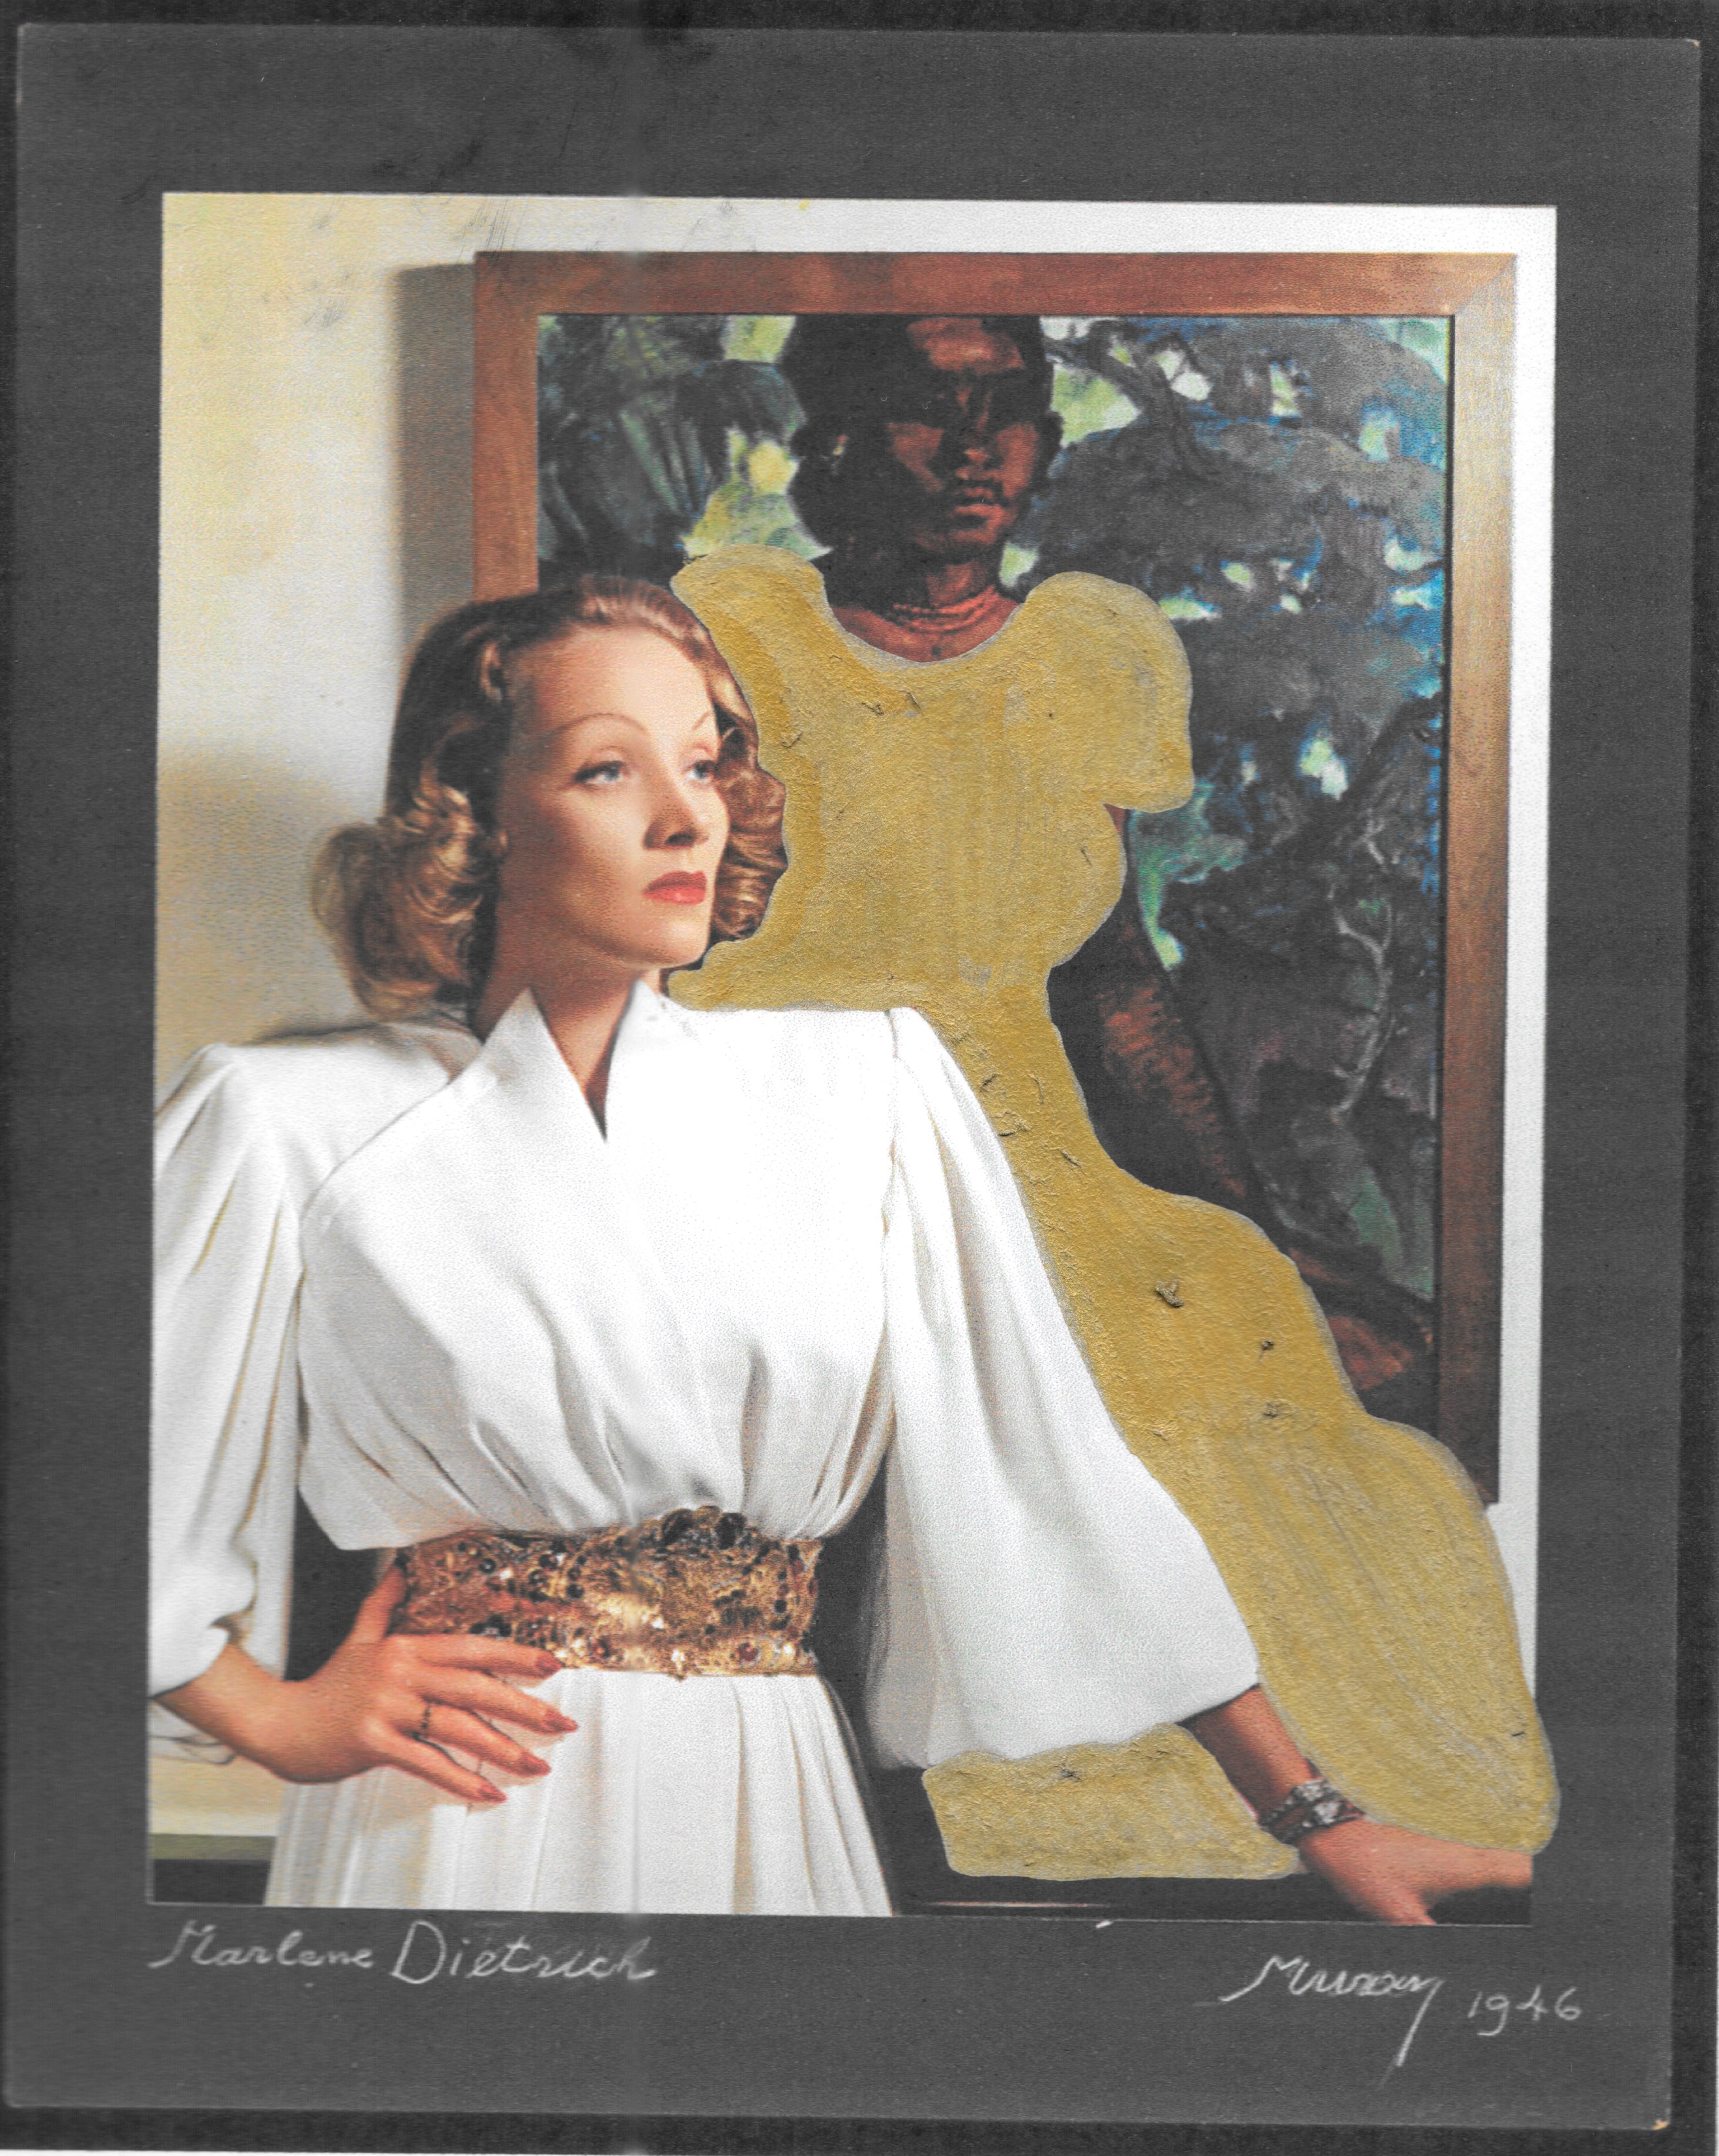 A Nickolas Muray 3-color carbro portrait of actress Marlene Dietrich. Dietrich is in front of a Paul Gauguin painting in a white dress with ornate golden belt. She is striking a similar pose as the native subject of Gauguin's painting.